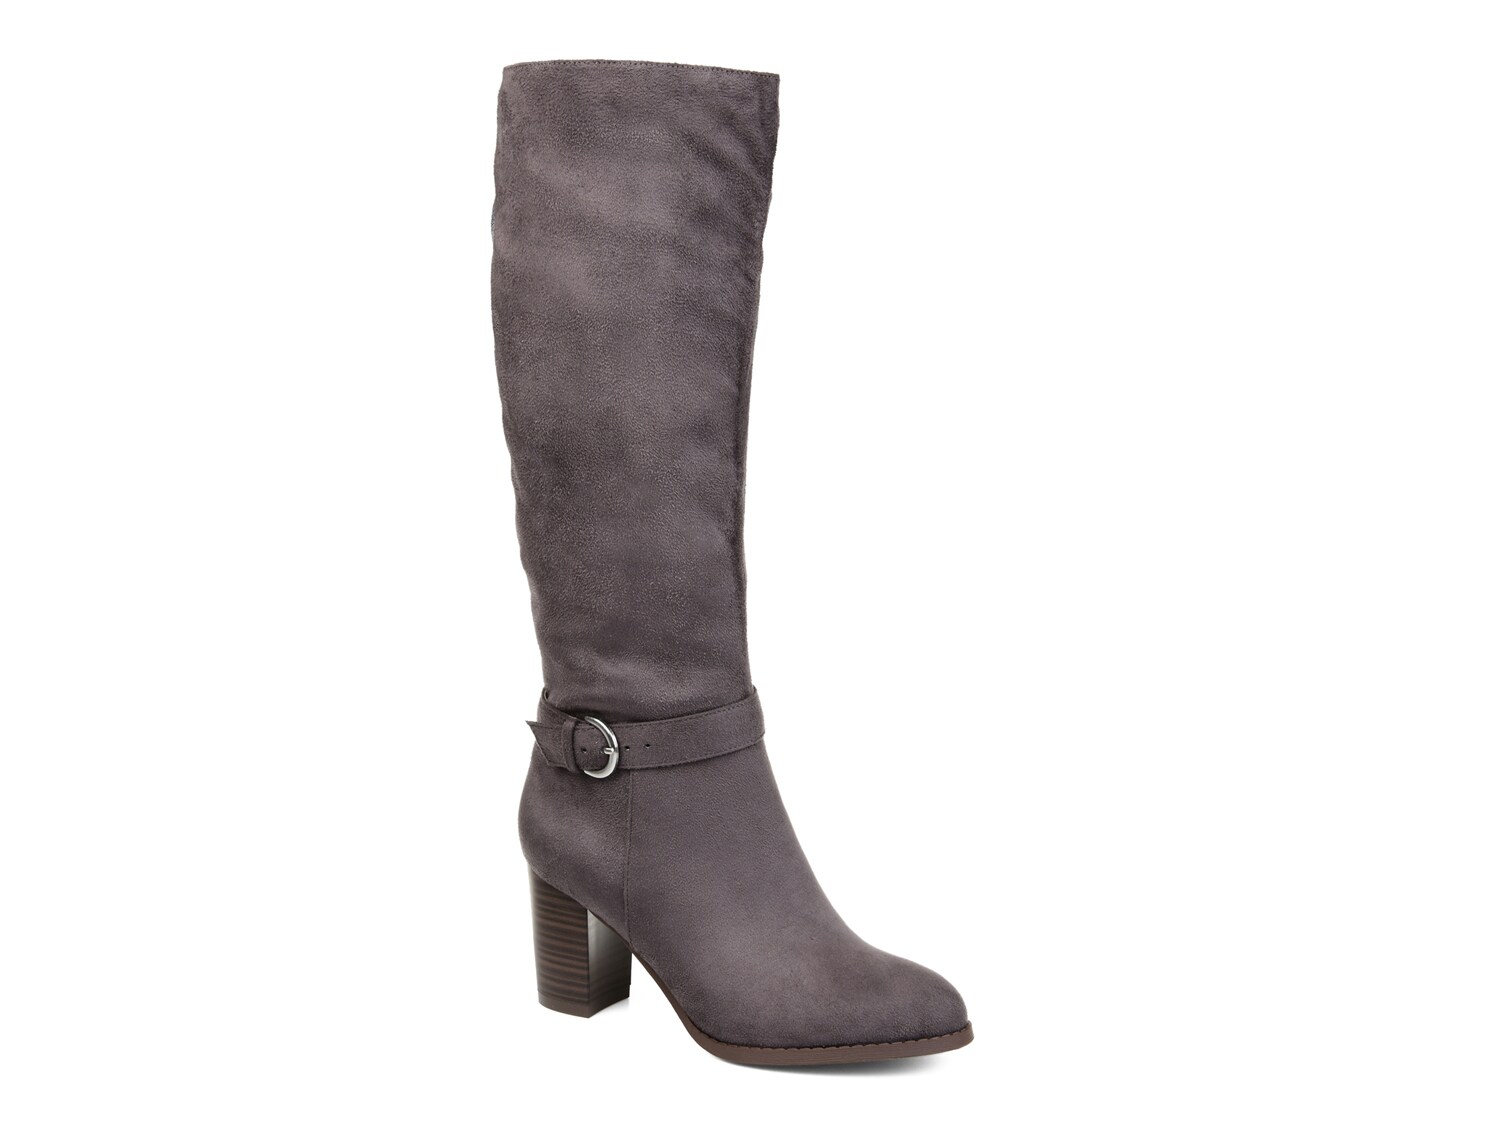 Journee Collection Joelle Riding Boot - Free Shipping | DSW